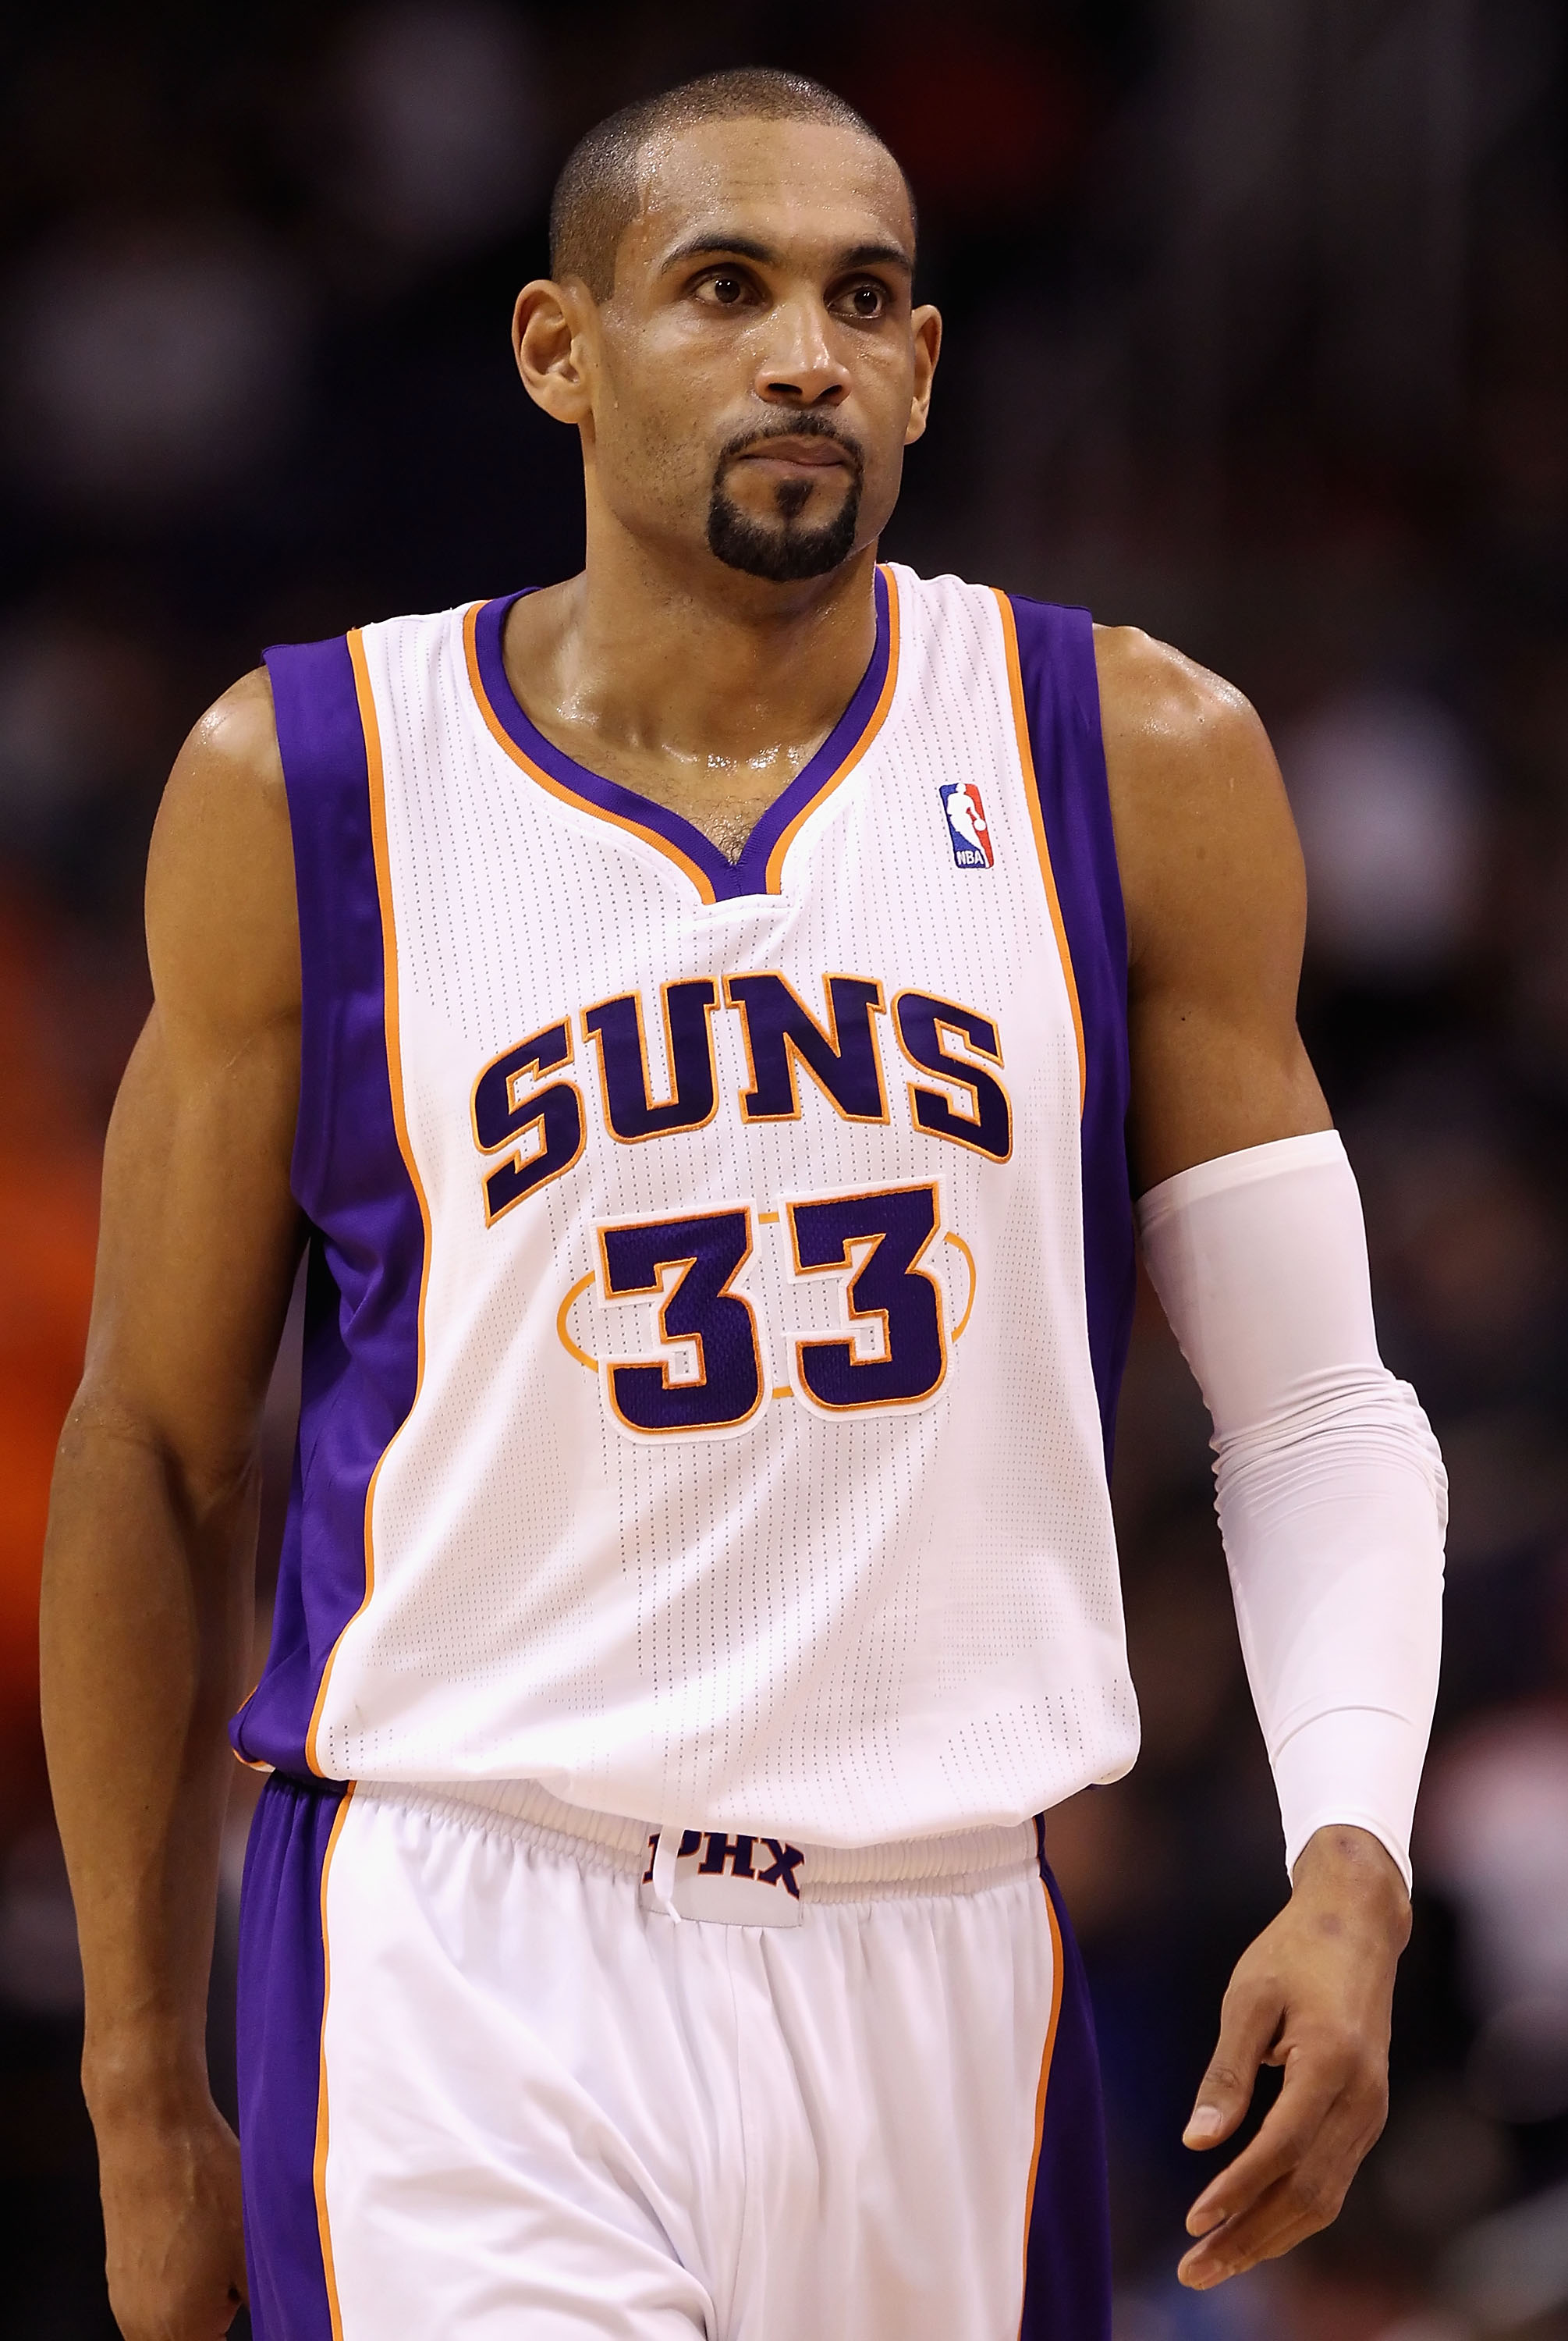 PHOENIX, AZ - JANUARY 14:  Grant Hill #33 of the Phoenix Suns in action during the NBA game against the Portland Trail Blazers at US Airways Center on January 14, 2011 in Phoenix, Arizona. The Suns defeated the Trail Blazers 115-111. NOTE TO USER: User ex